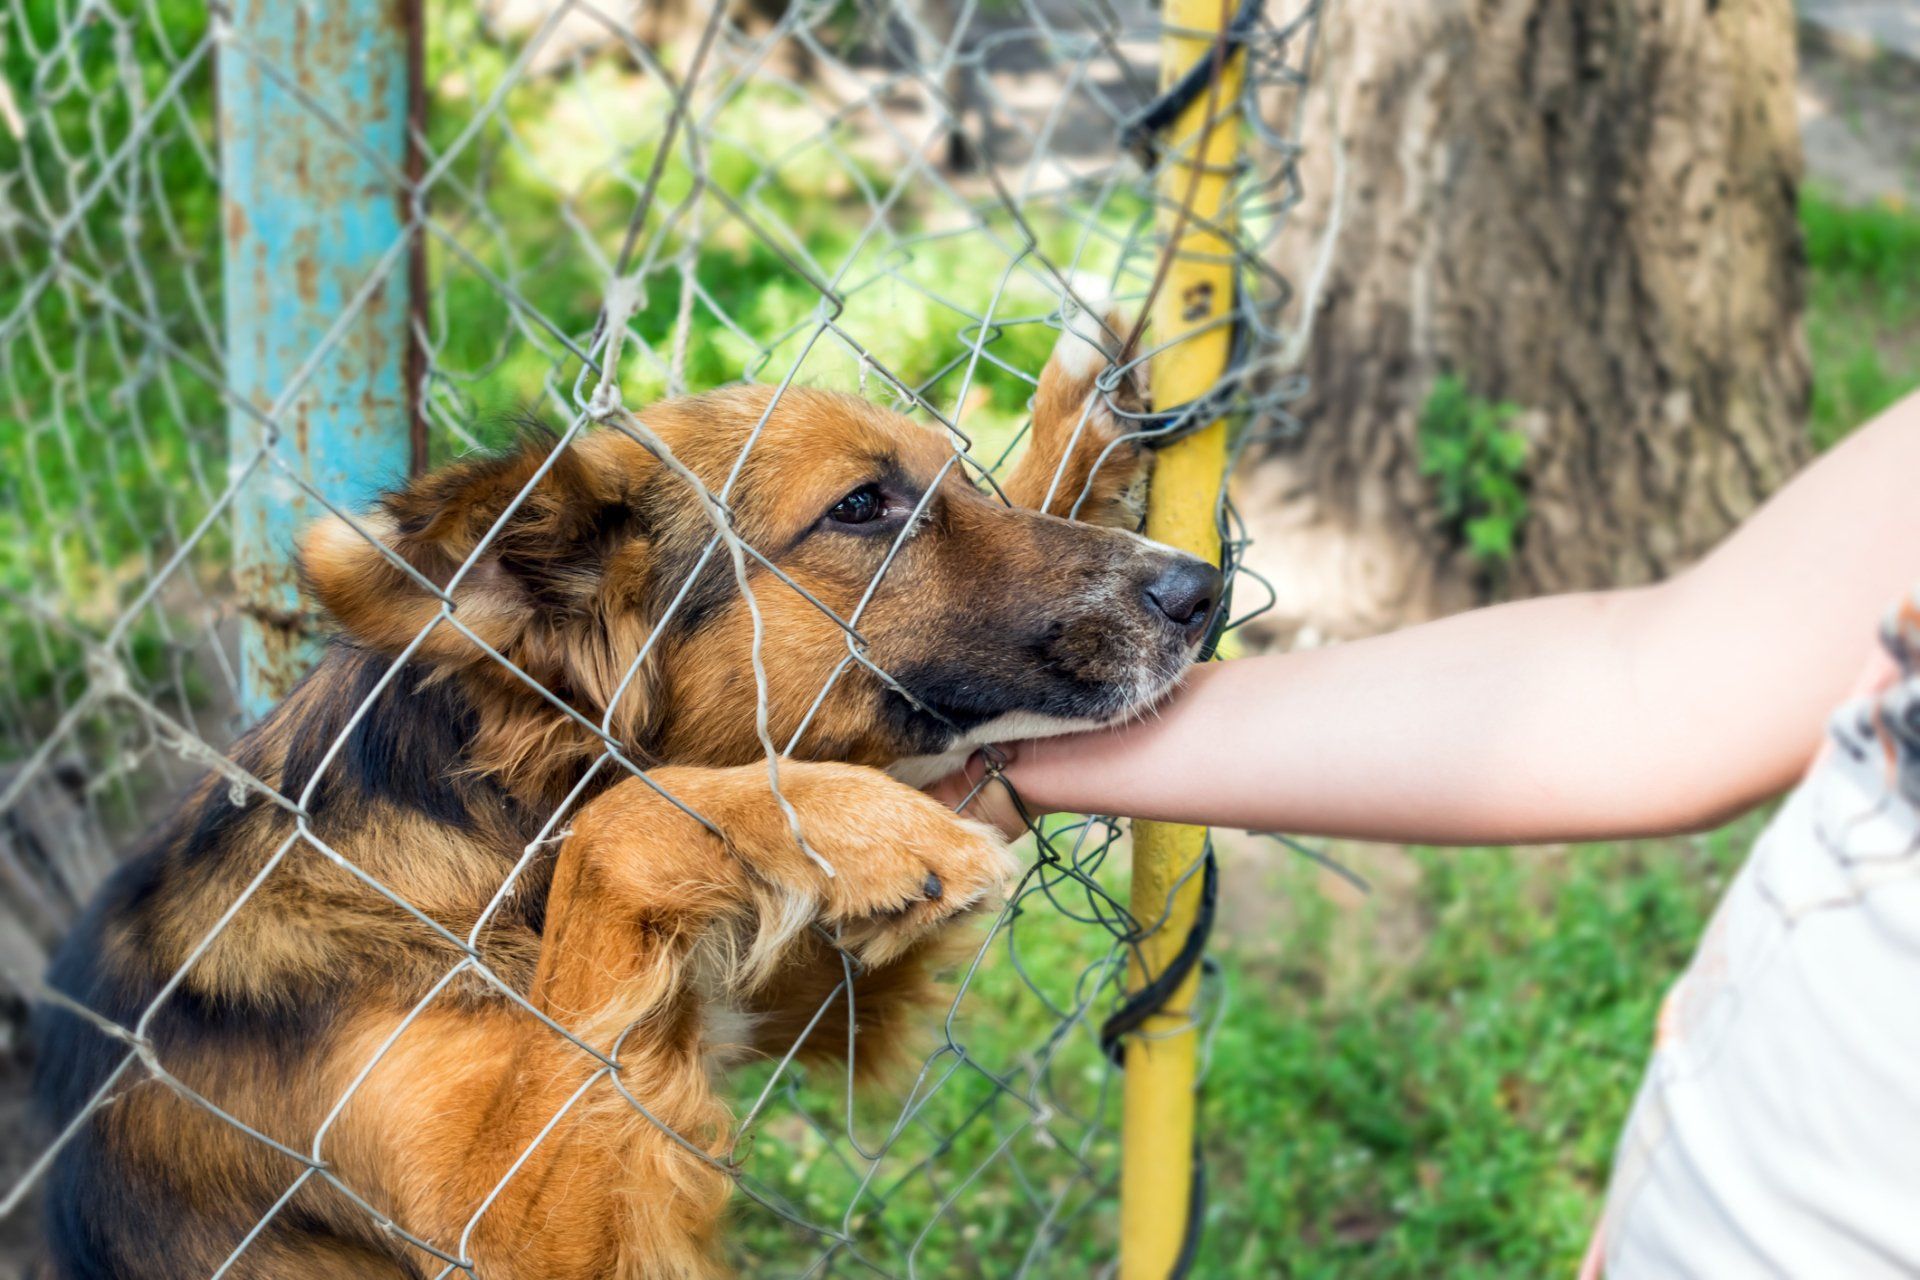 a person petting a dog behind a chain link fence